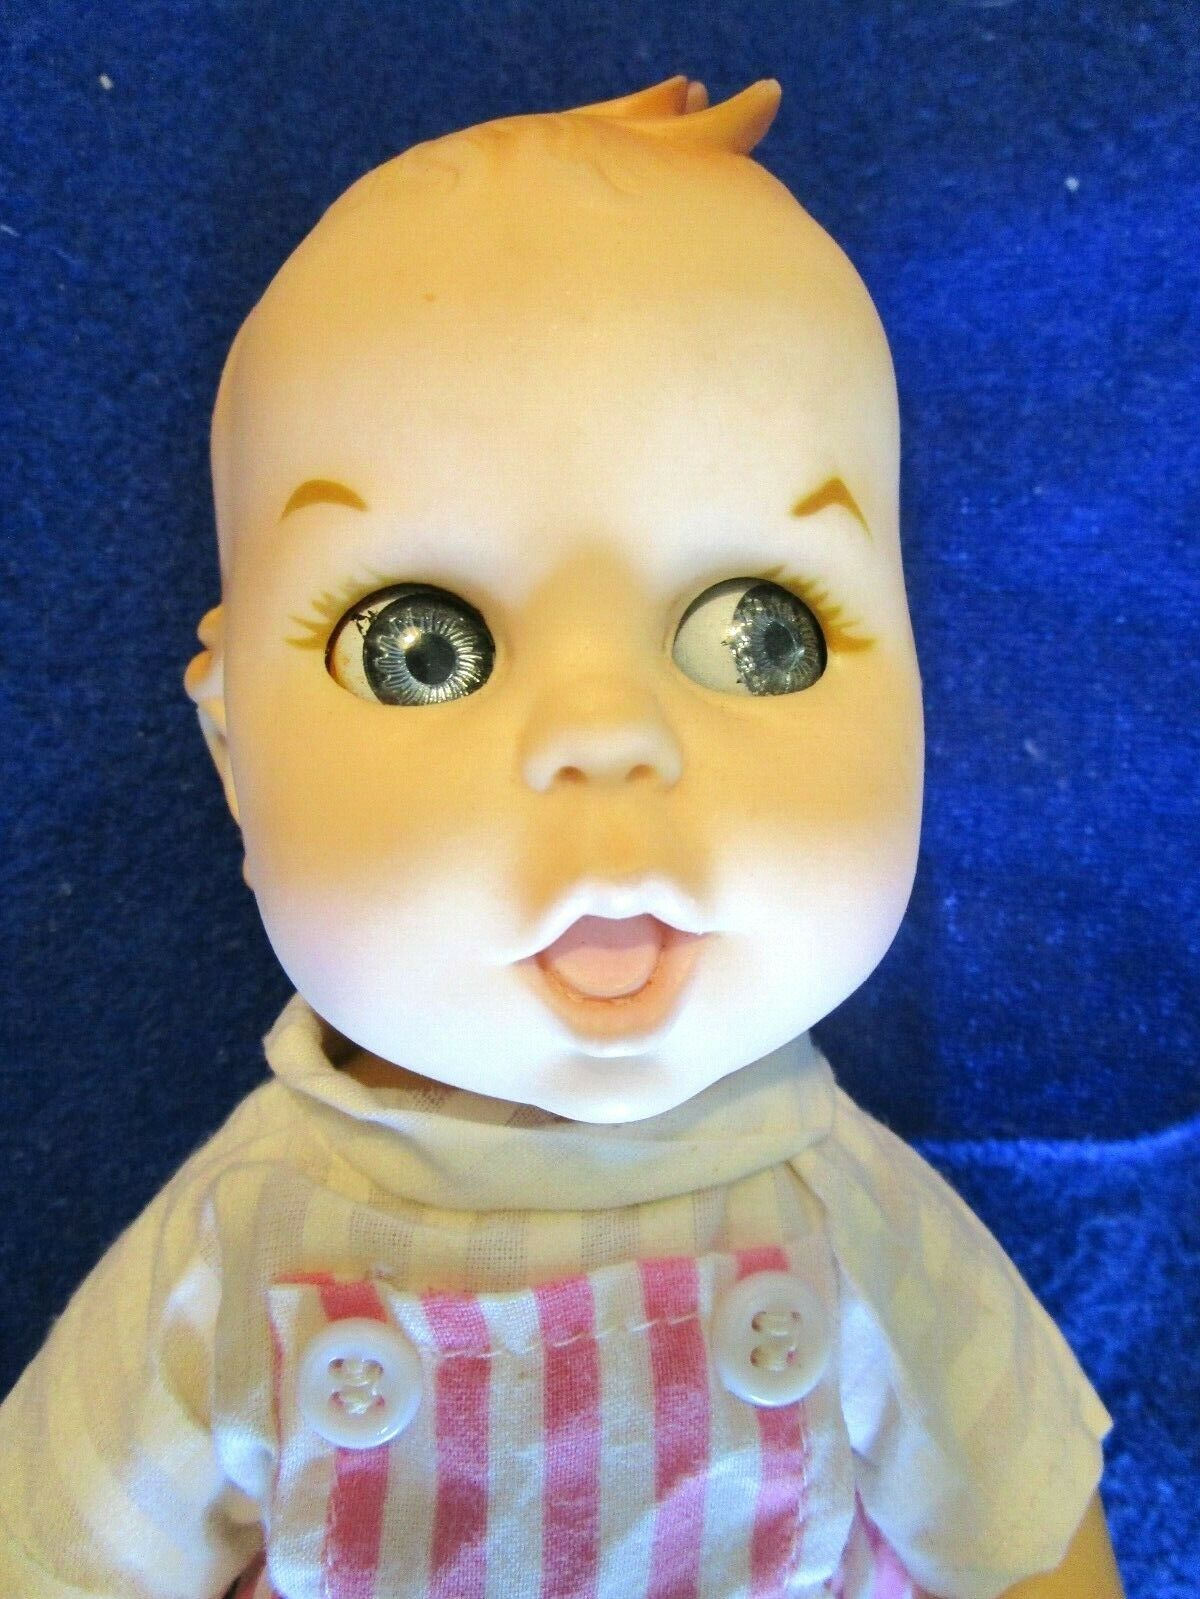 Gerber Baby Doll, Plastic Moving Eyes, Rubber Body, Molded Head, 1985